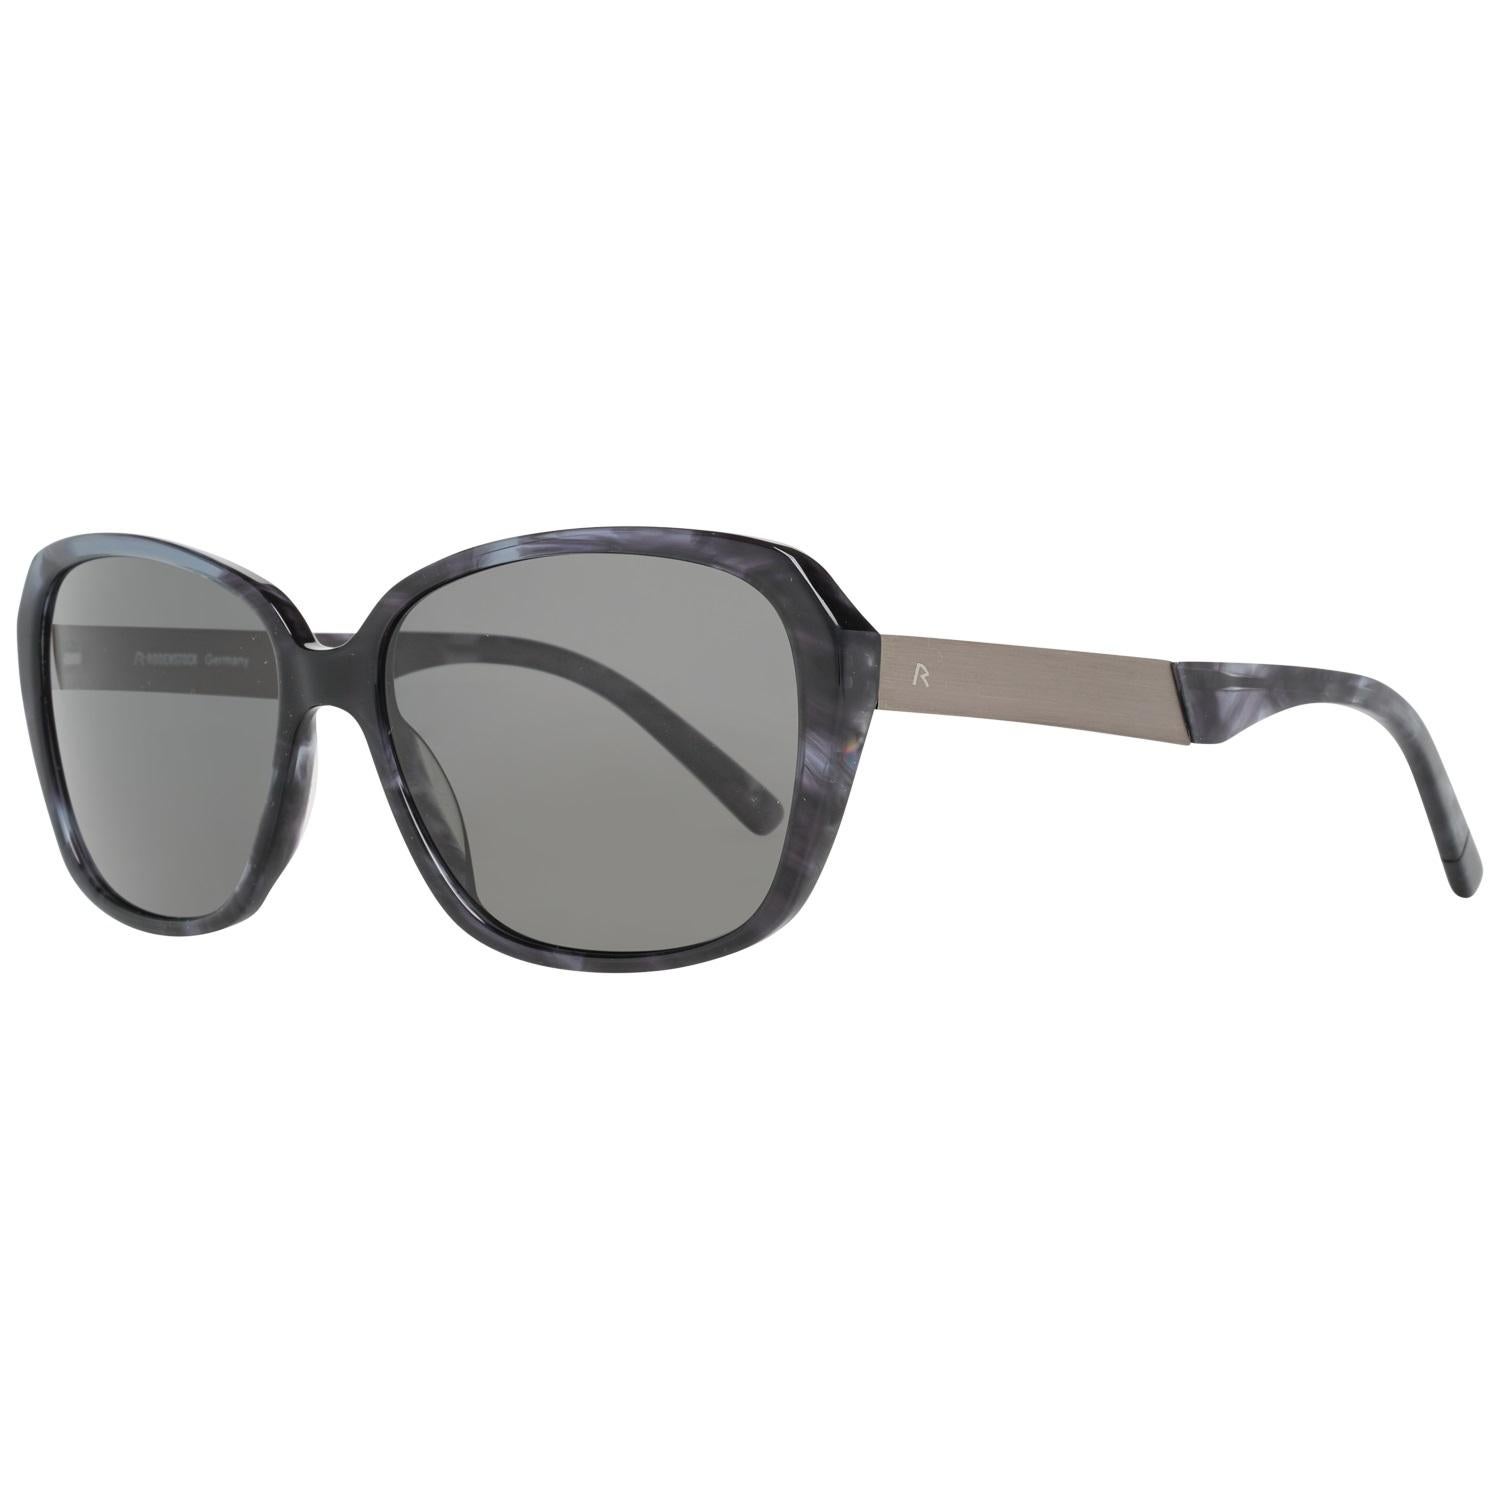 Details
MATERIAL: Metal
COLOR: Grey
MODEL: R3299 A 57
GENDER: Women
COUNTRY OF MANUFACTURE: China
TYPE: Sunglasses
ORIGINAL CASE?: Yes
STYLE: Rectangle
OCCASION: Casual
FEATURES: Lightweight
LENS COLOR: Grey
LENS TECHNOLOGY: Polarized
YEAR